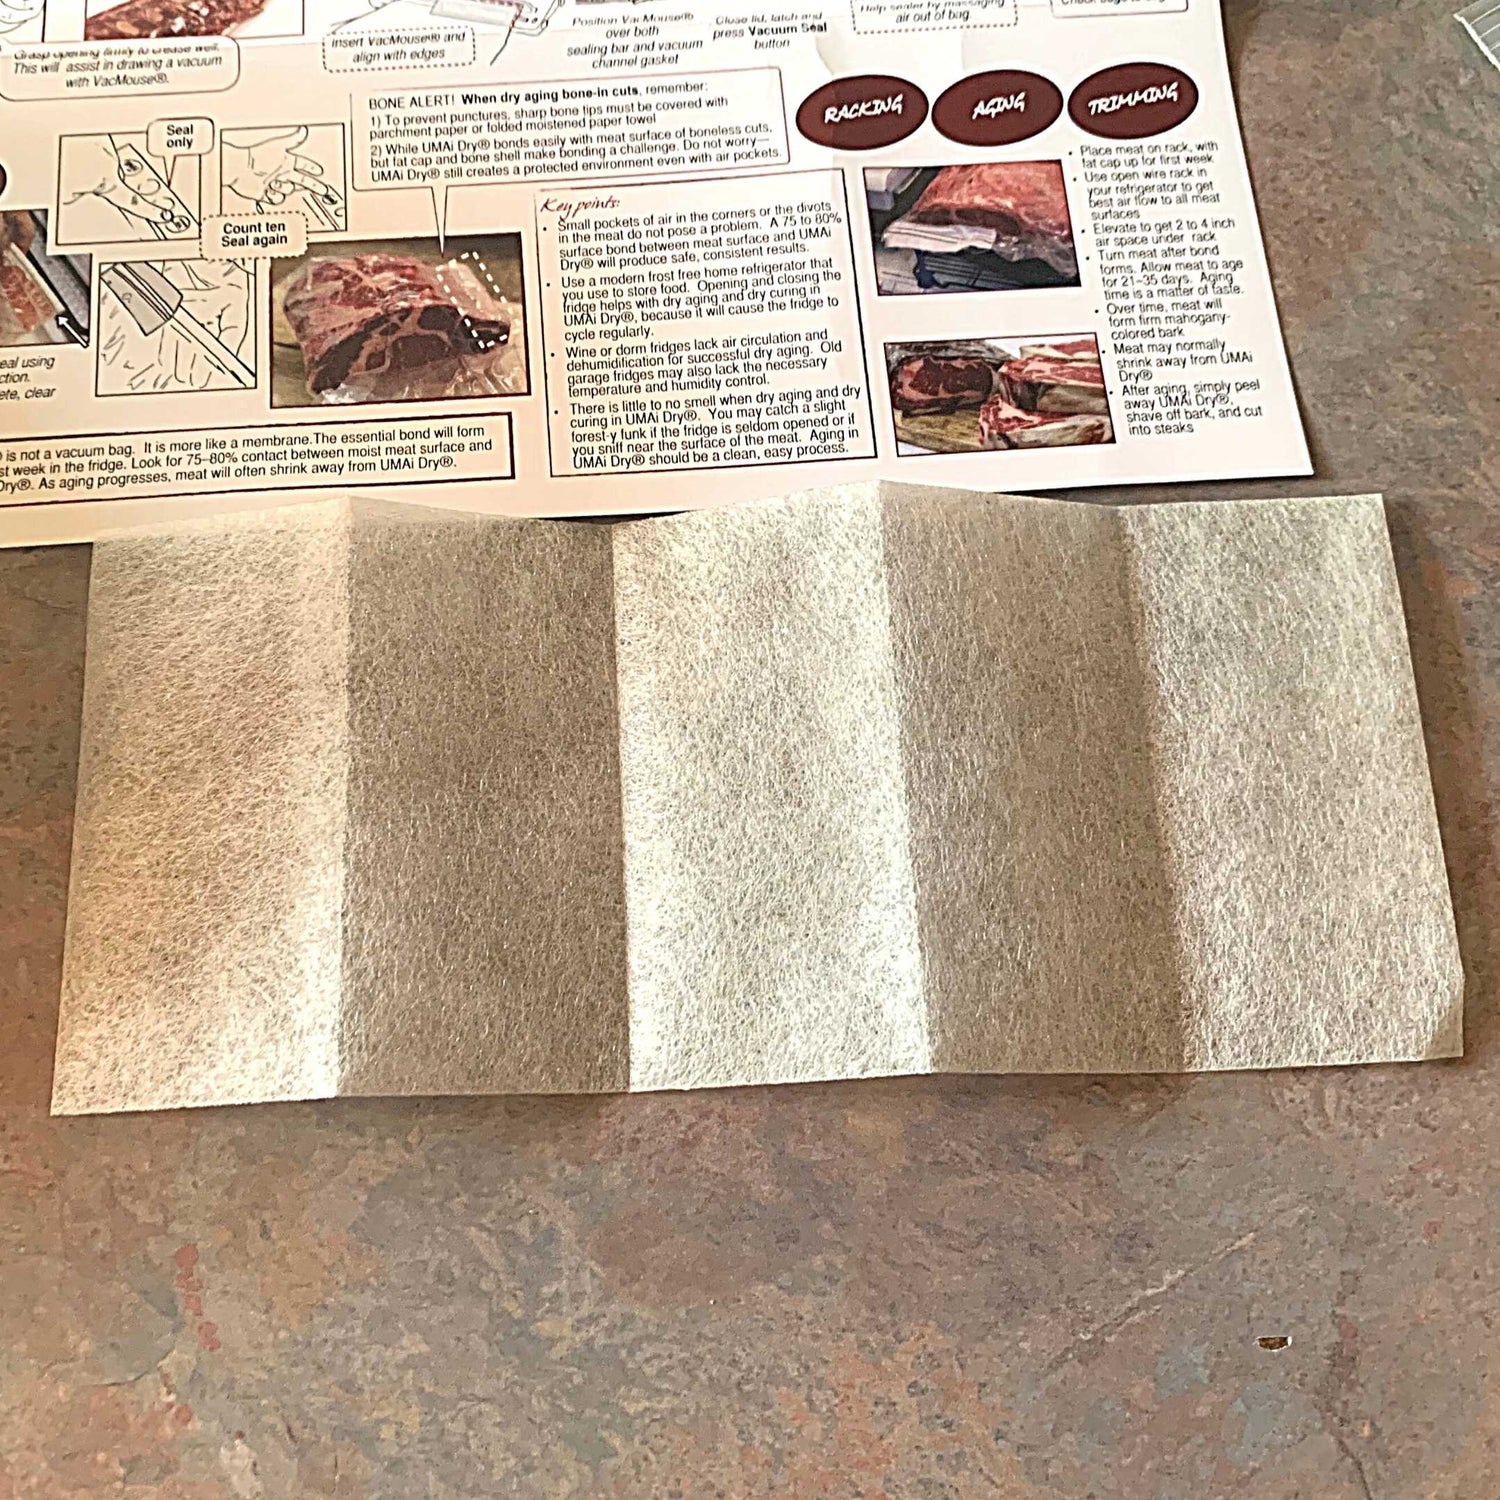 VacMouse bundle vacuum aid strips for in UMai Dry aging bag 